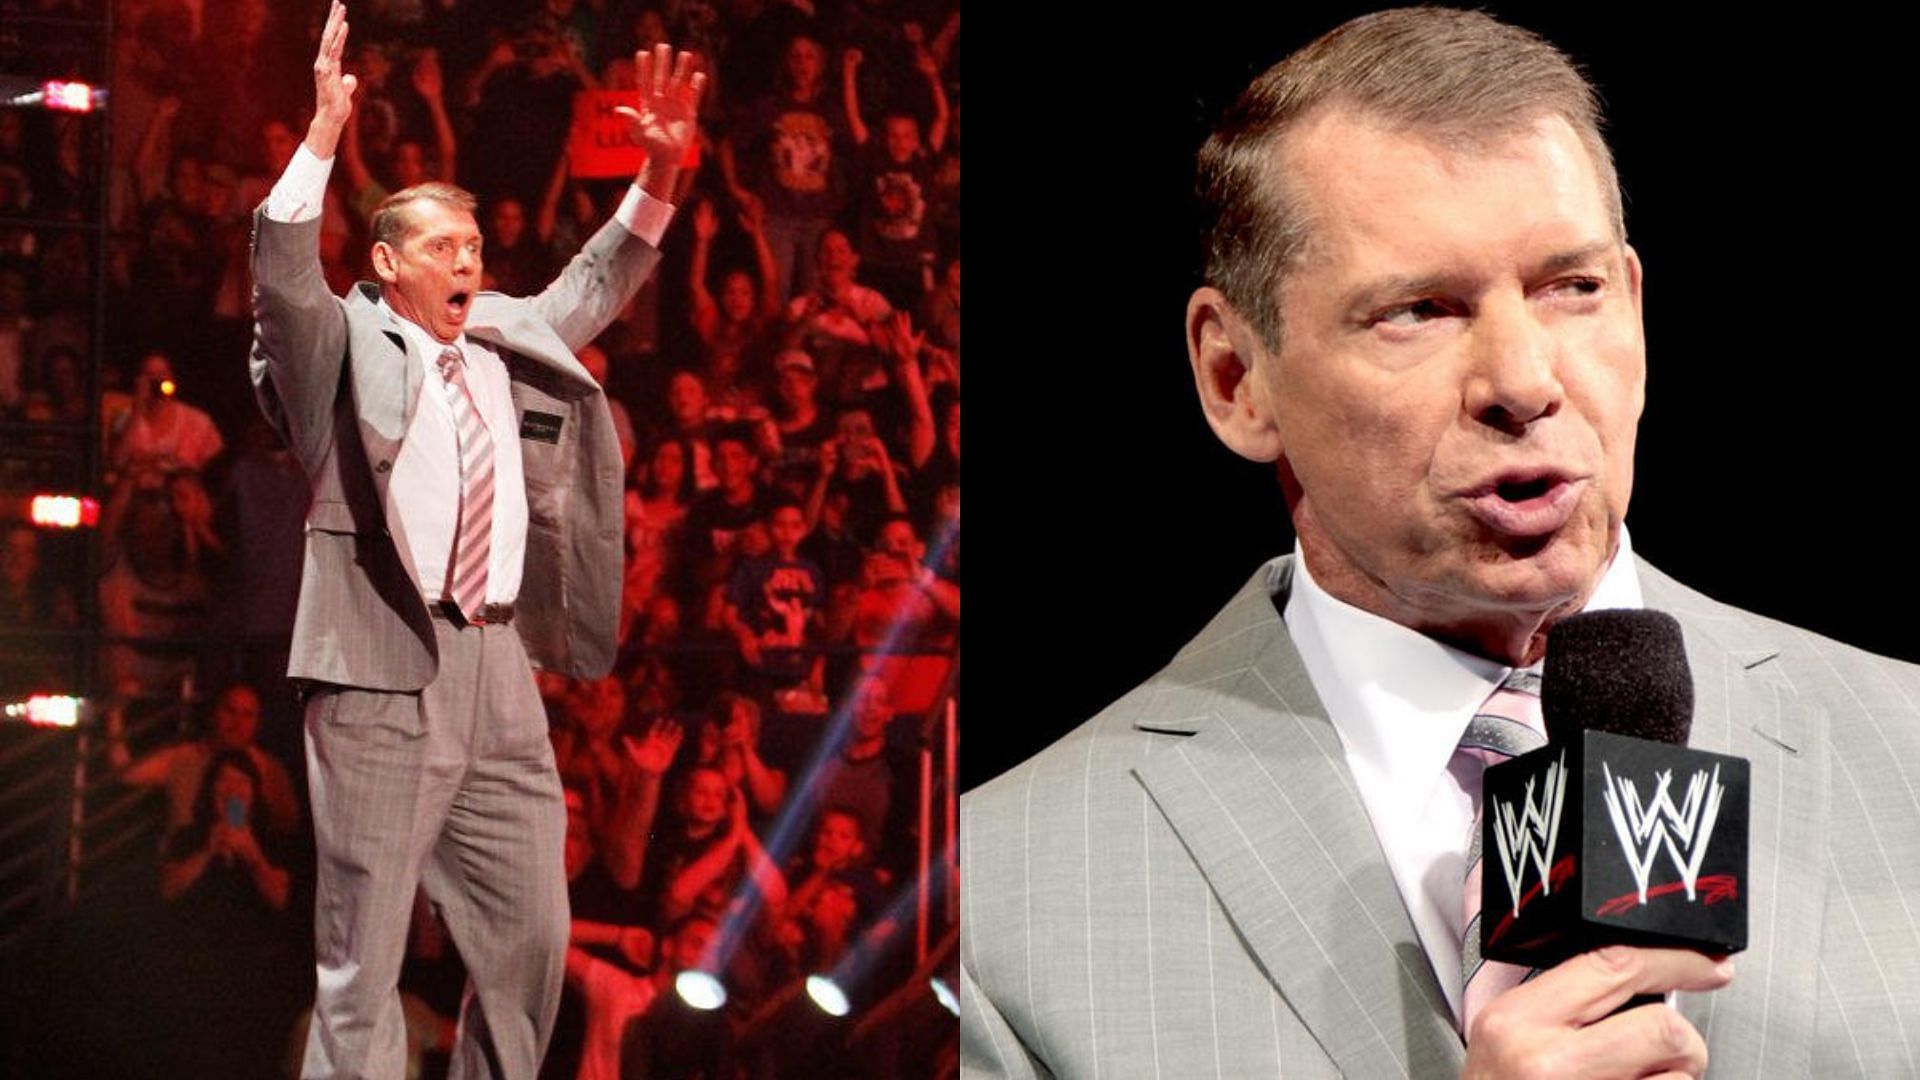 What is next for Vince McMahon?